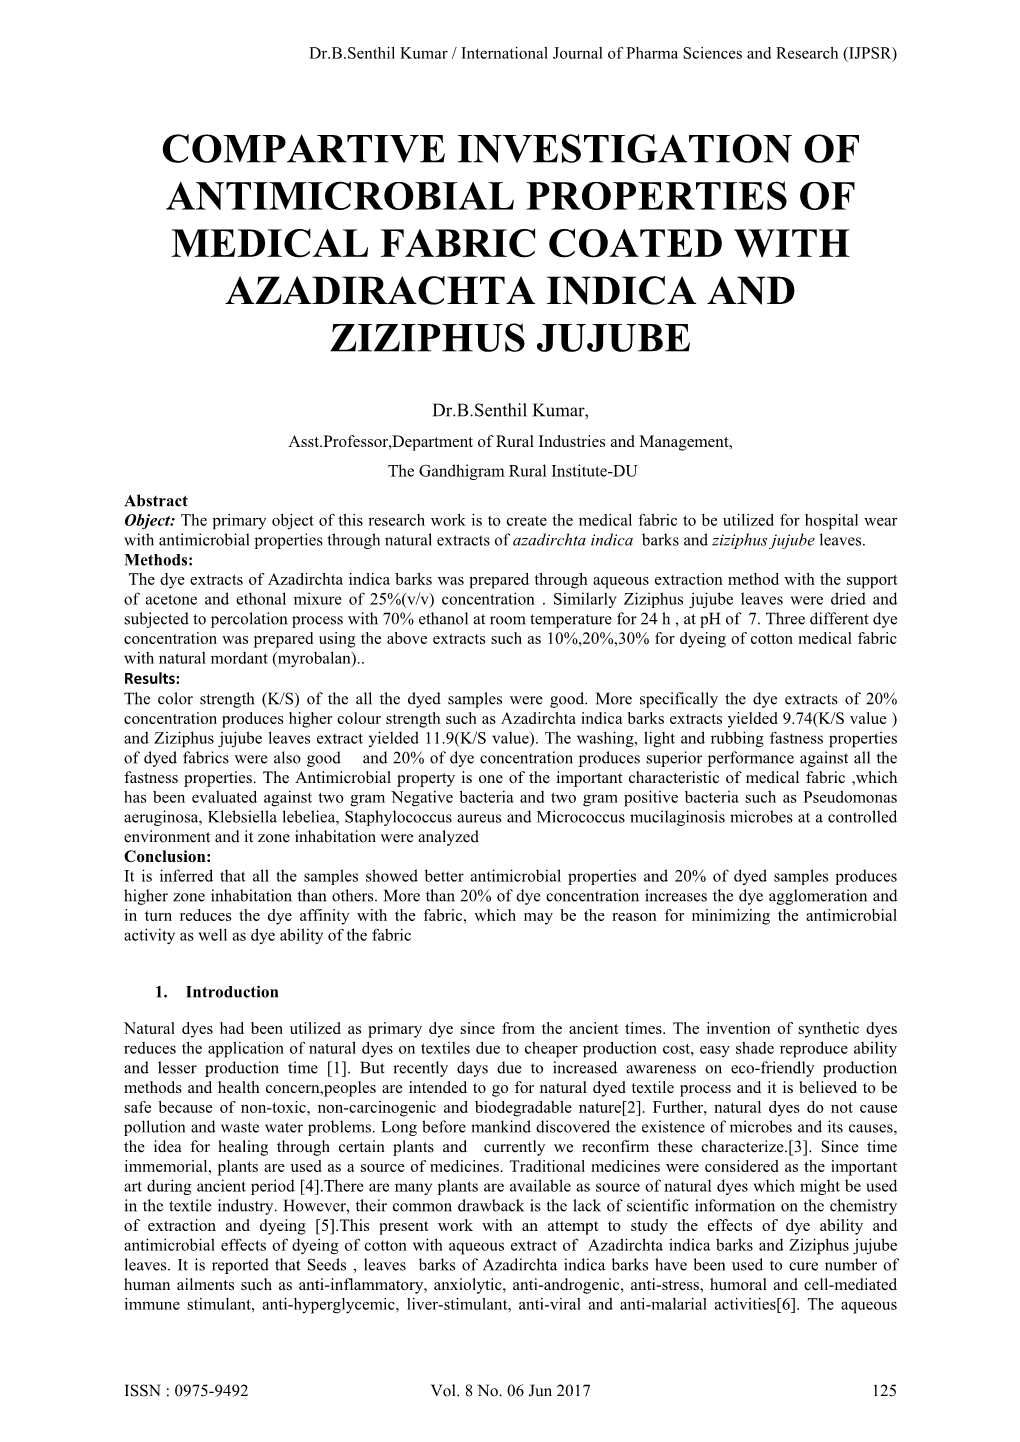 Compartive Investigation of Antimicrobial Properties of Medical Fabric Coated with Azadirachta Indica and Ziziphus Jujube